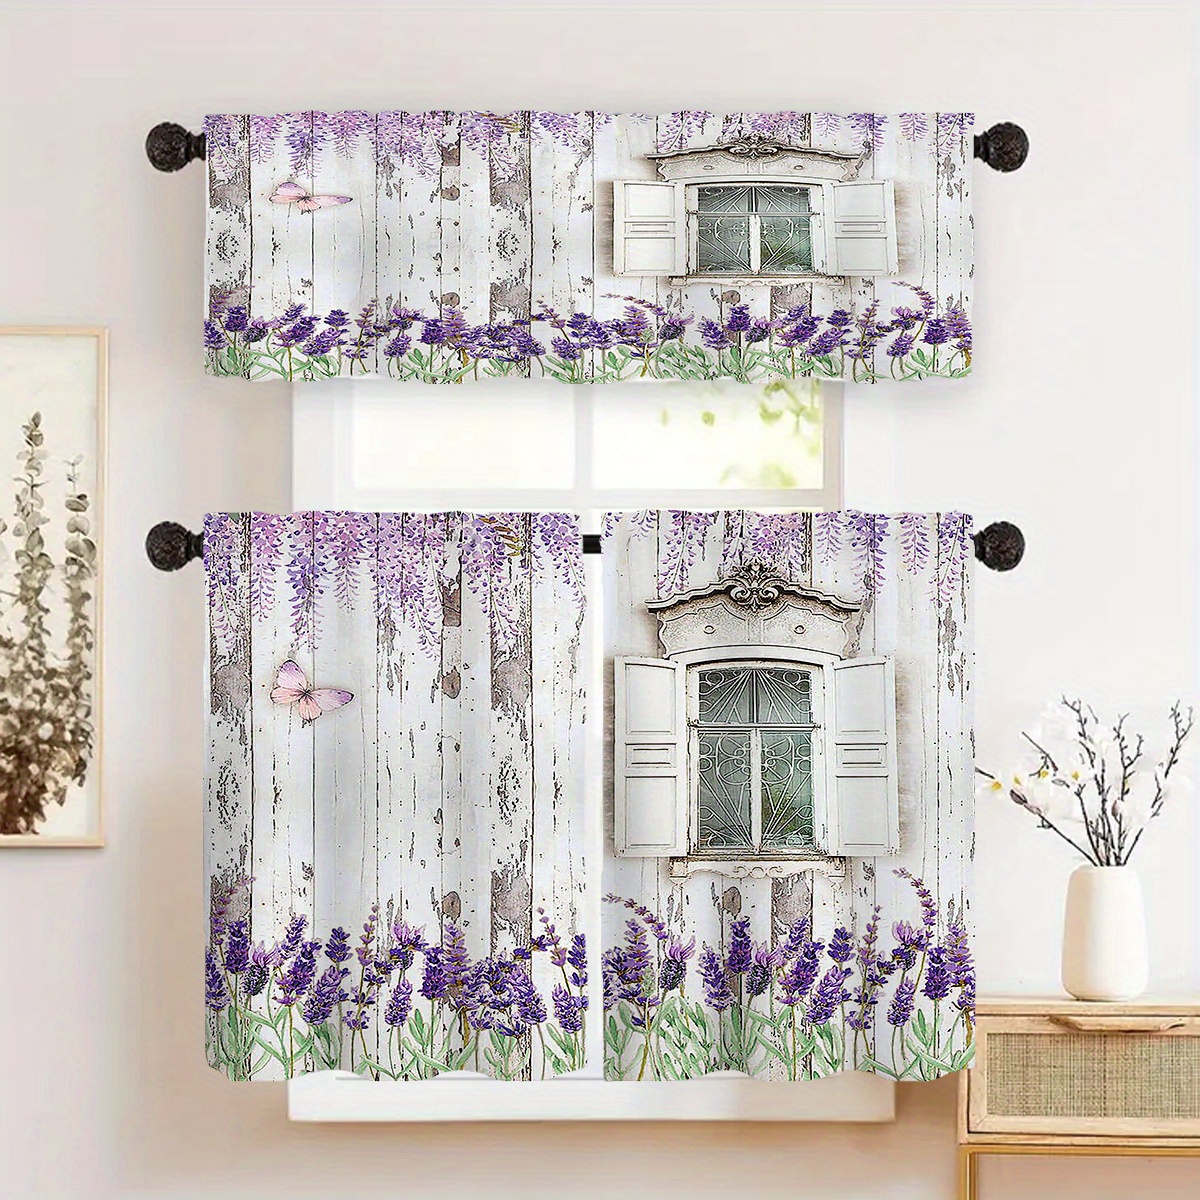 

Lavender & Butterfly Print Sheer Curtains - 1pc/2pcs Set, Rod Pocket Design For Living Room, Bedroom, Kitchen, Bathroom, And More - Versatile Country Style Decor